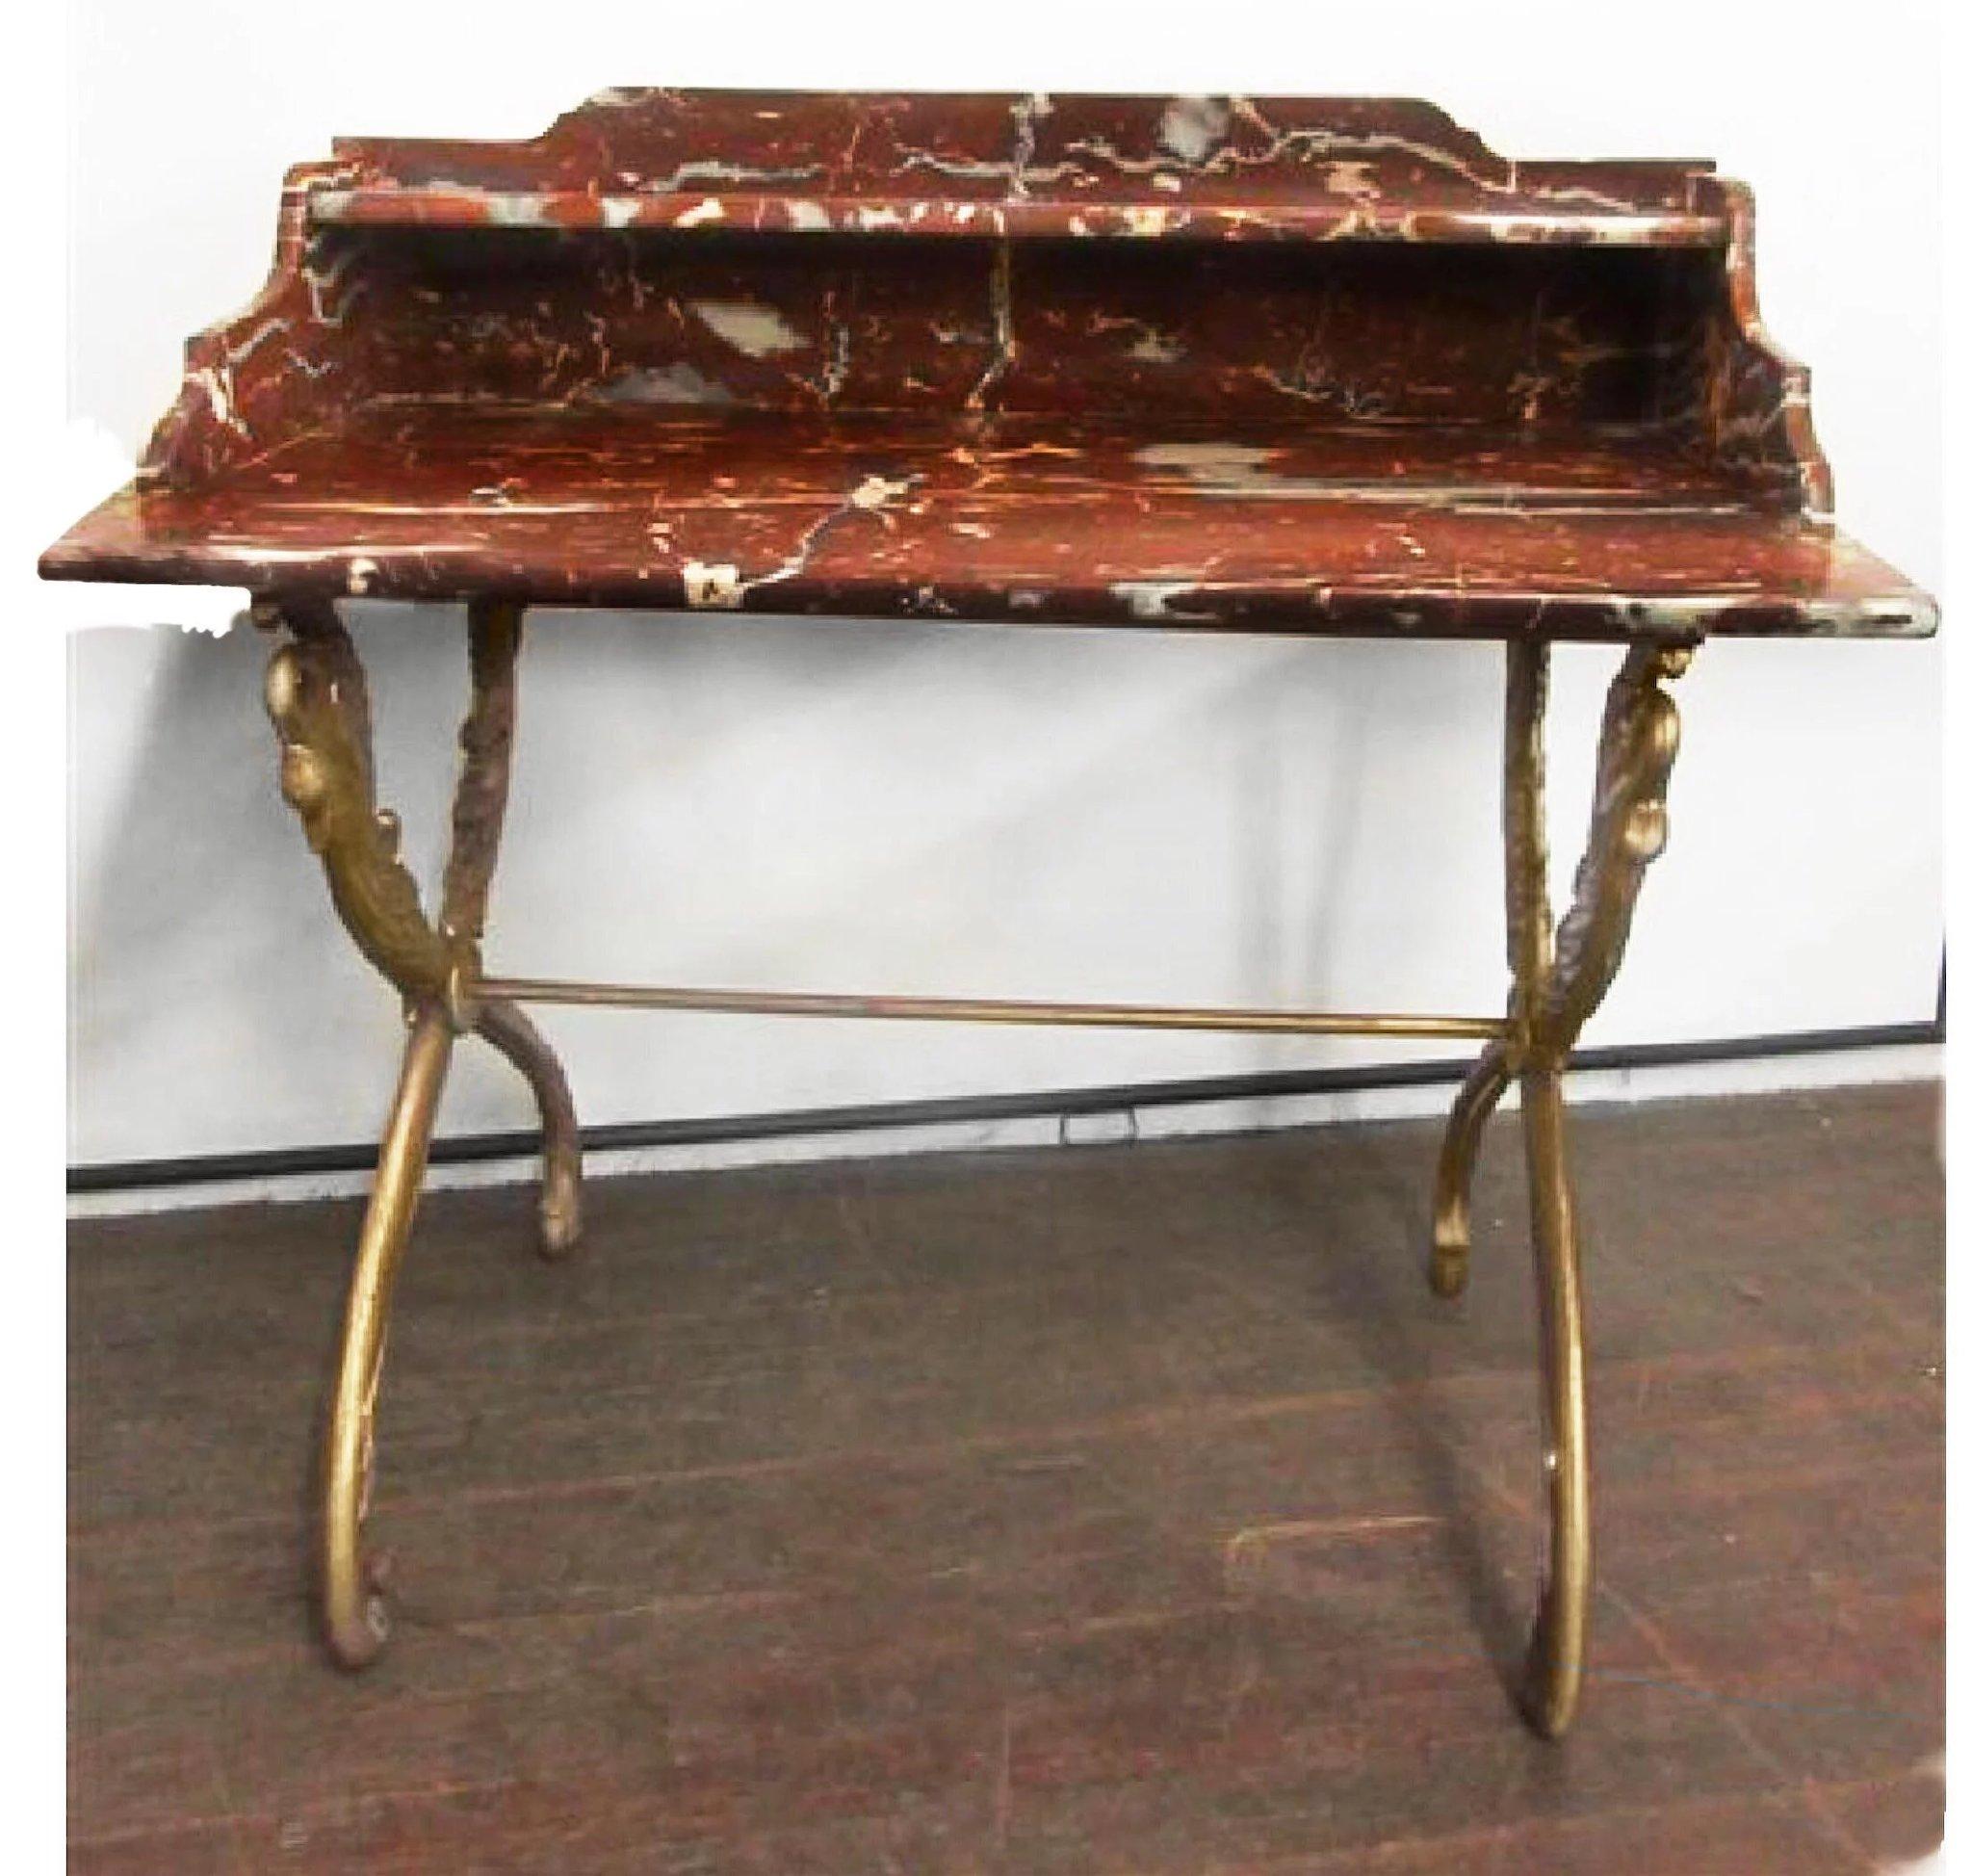 This 18th-century French marble top table would be among the world's most lux desks, vanities or serving tables. Deep 'rouge de rance' marble top, a la Versailles, sculpted and burnished with care, is the real star of the show. Breathtaking marbling